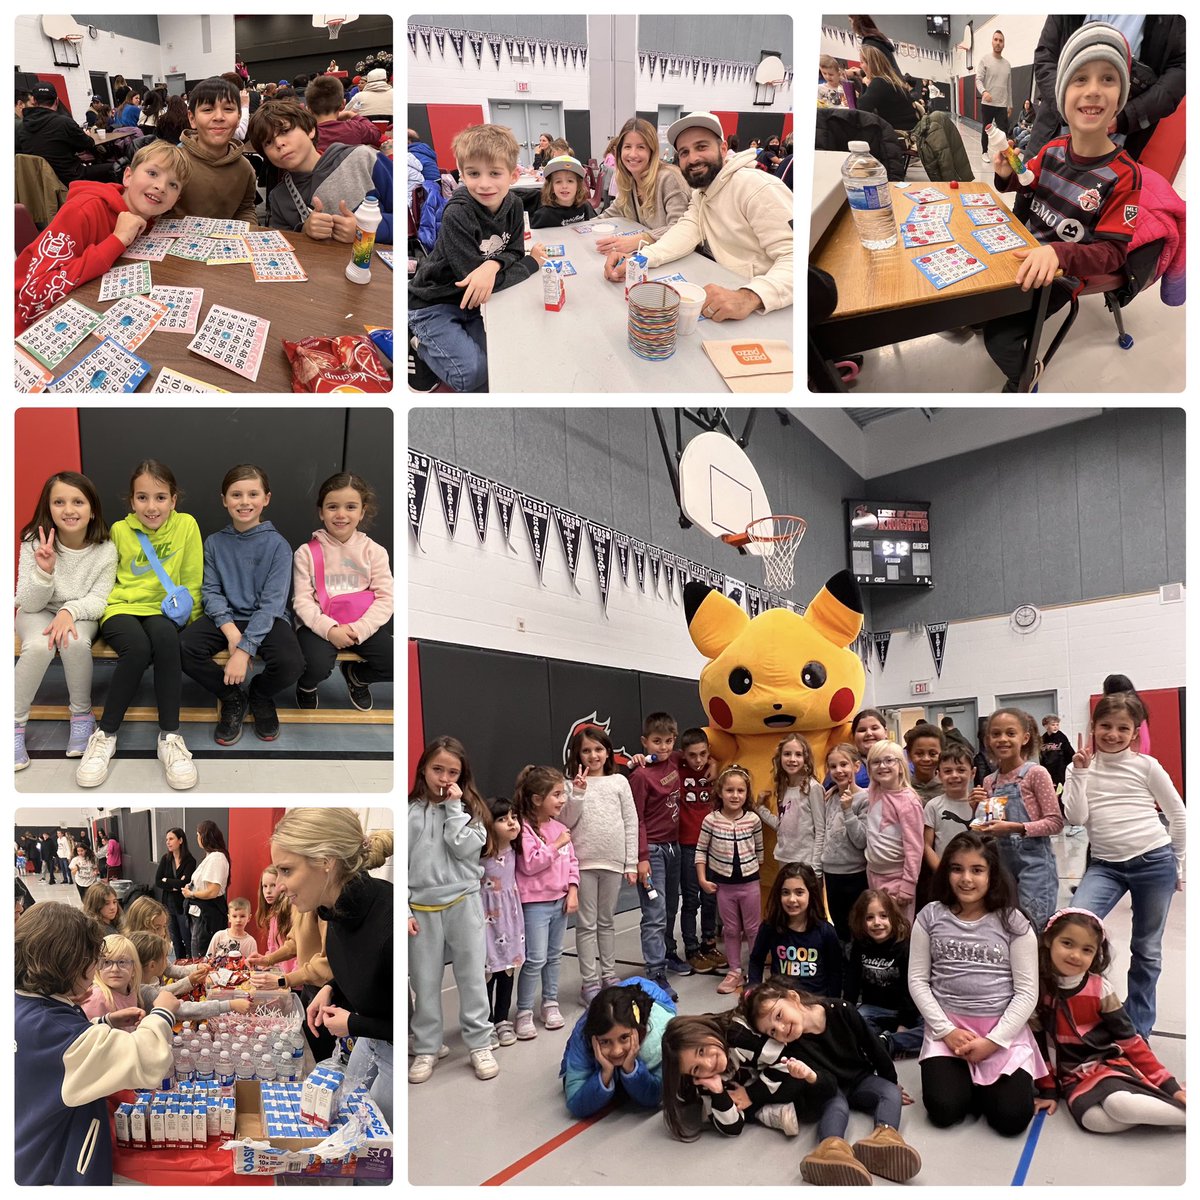 LOC families braved the icy weather to make CSC’s Bingo Night a huge success! @YCDSB @ElizabethCrowe_ @DomenicScuglia